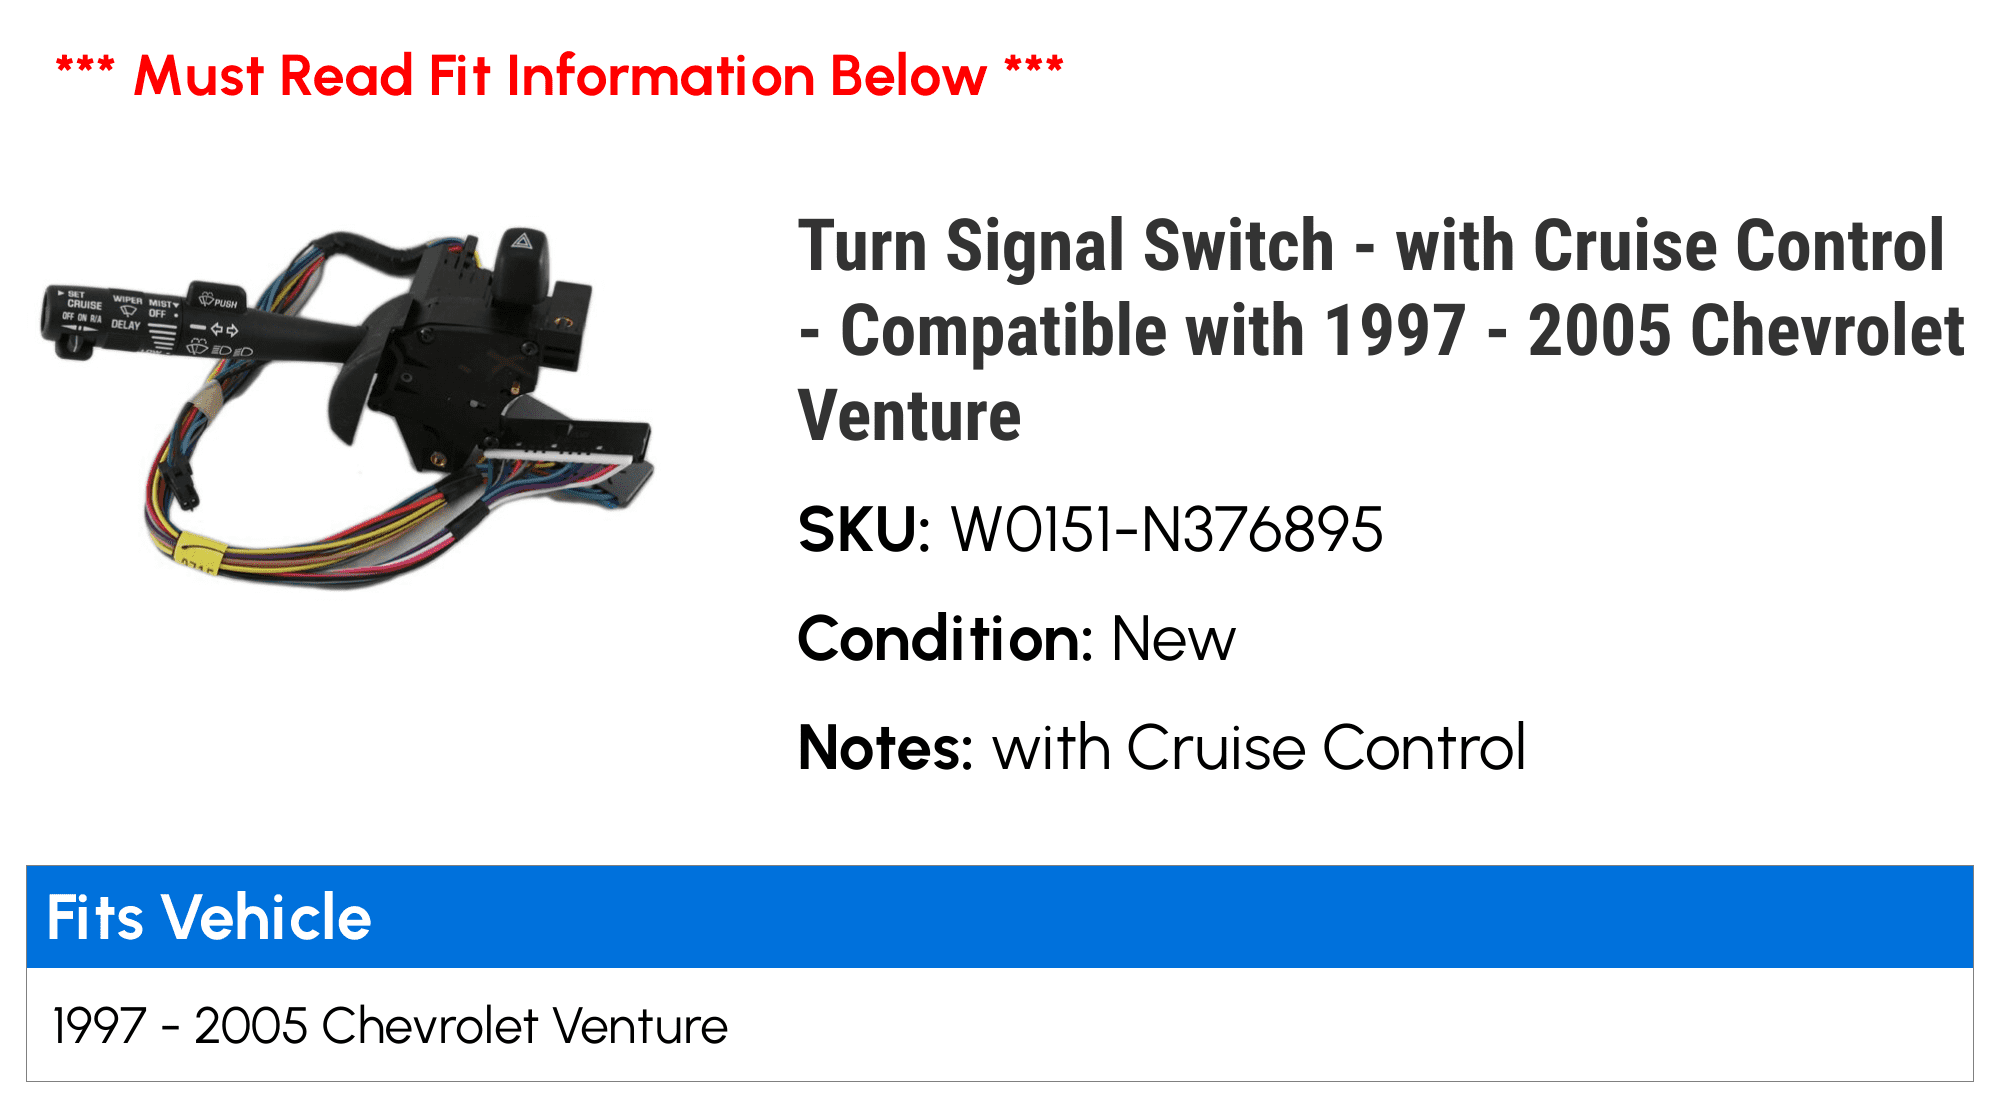 Combination Switch compatible with Chevrolet Venture 97-05 Combination Cruise Control Dimmer Headlight and Turn 